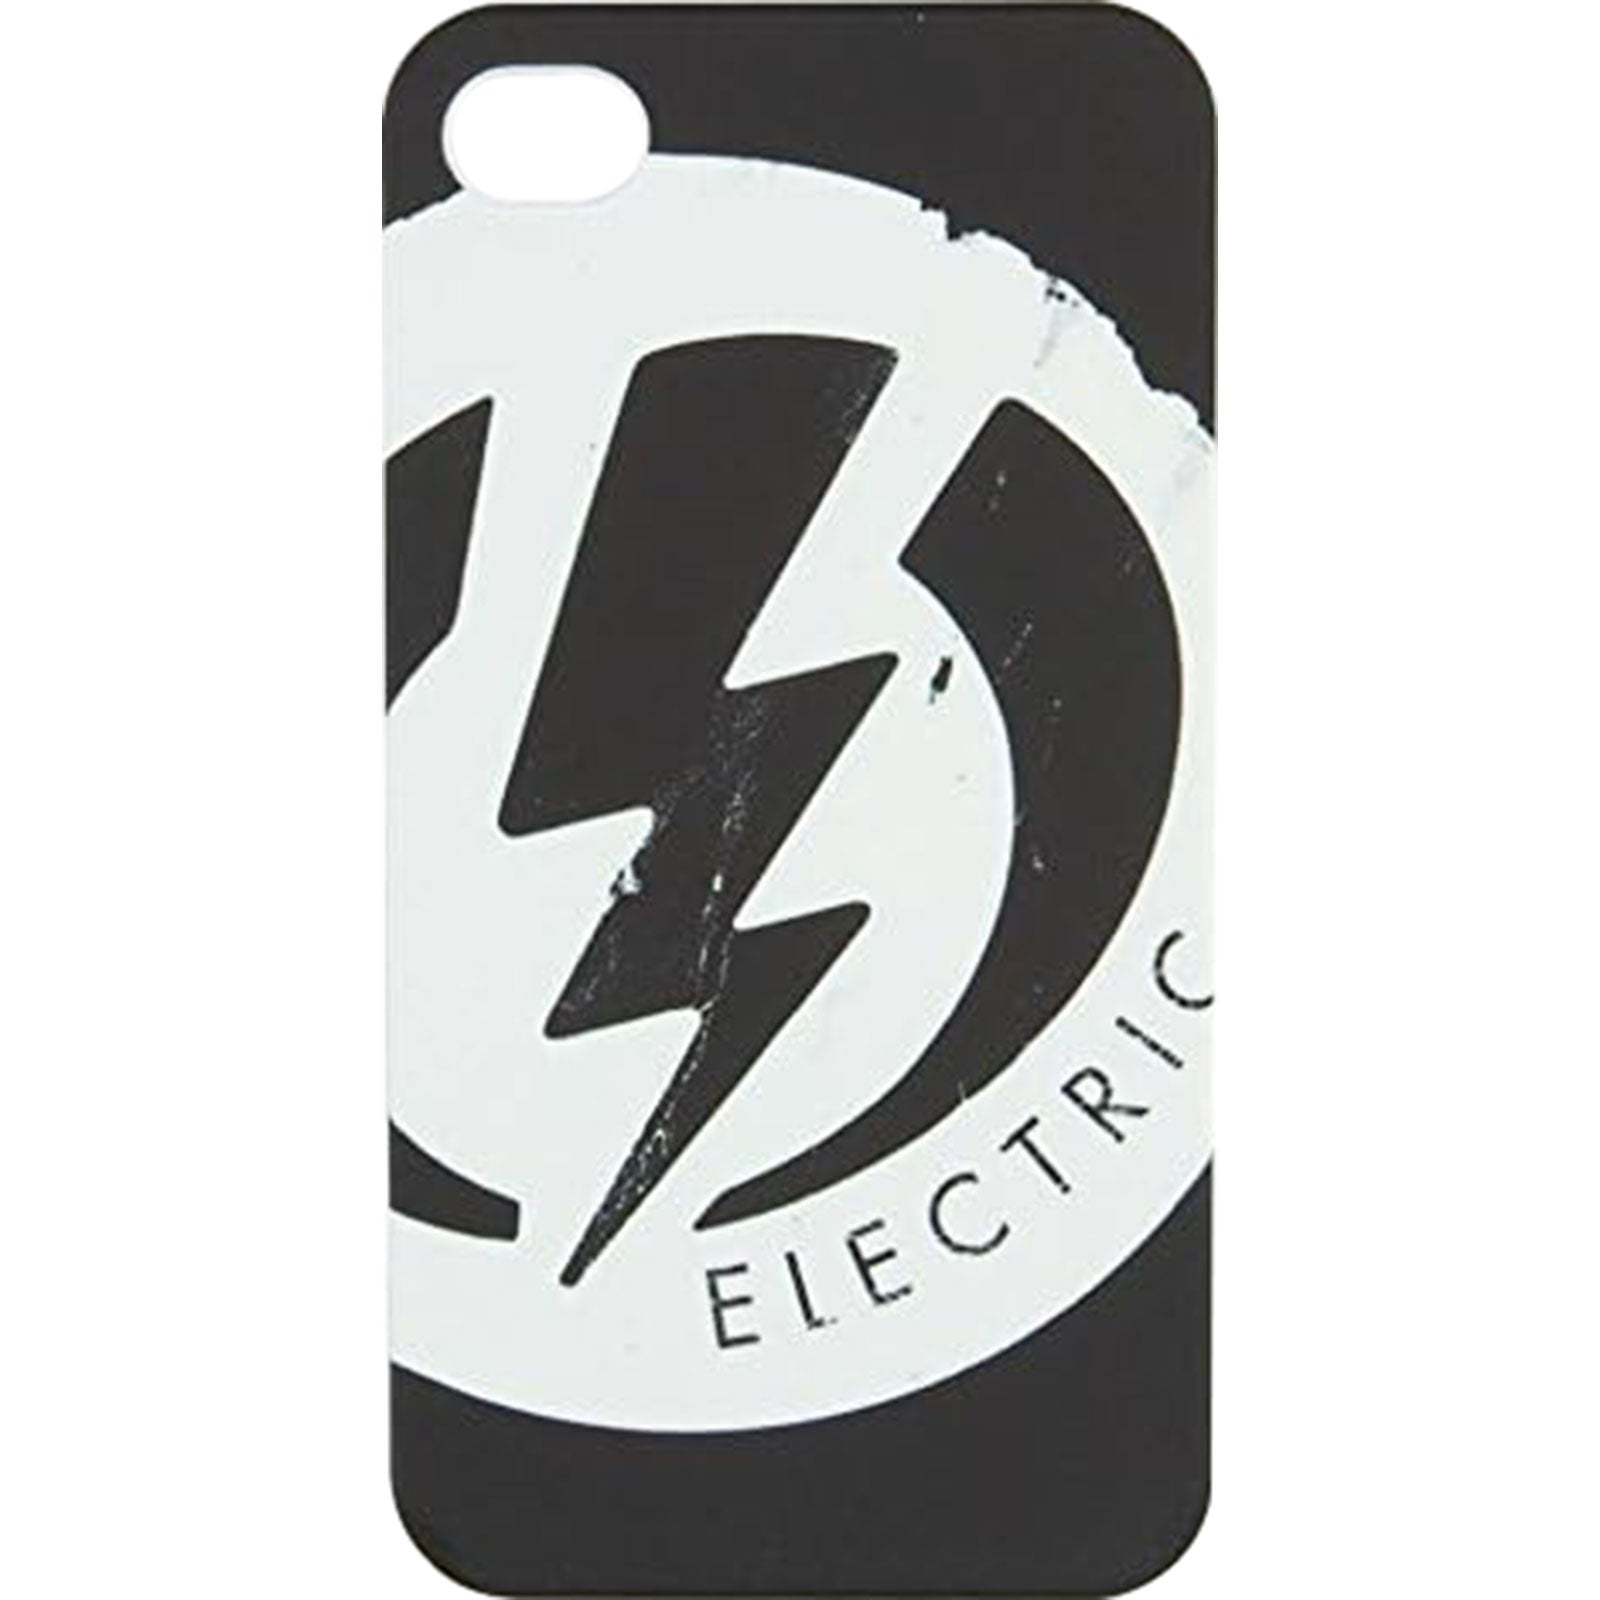 Electric iPhone 4/4S Case Phone Access-884932206231